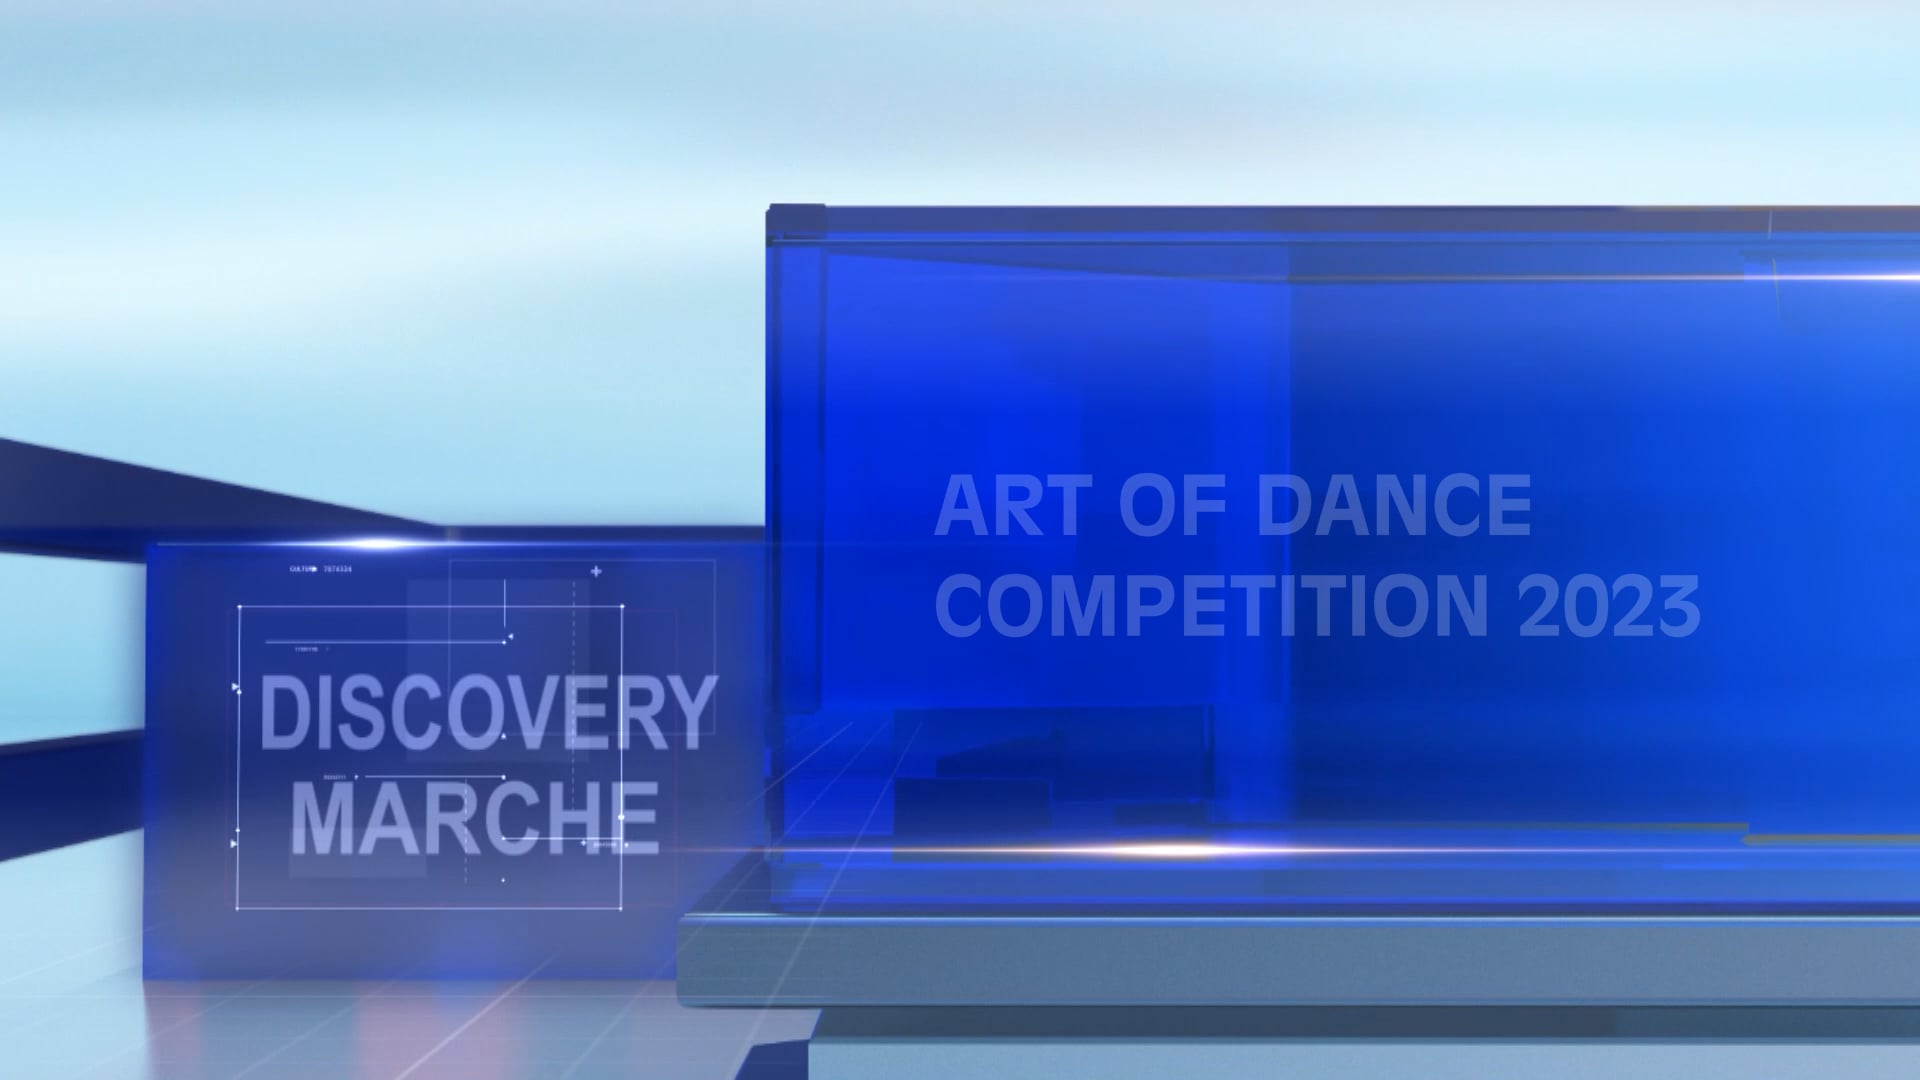 Art of dance competition 2023